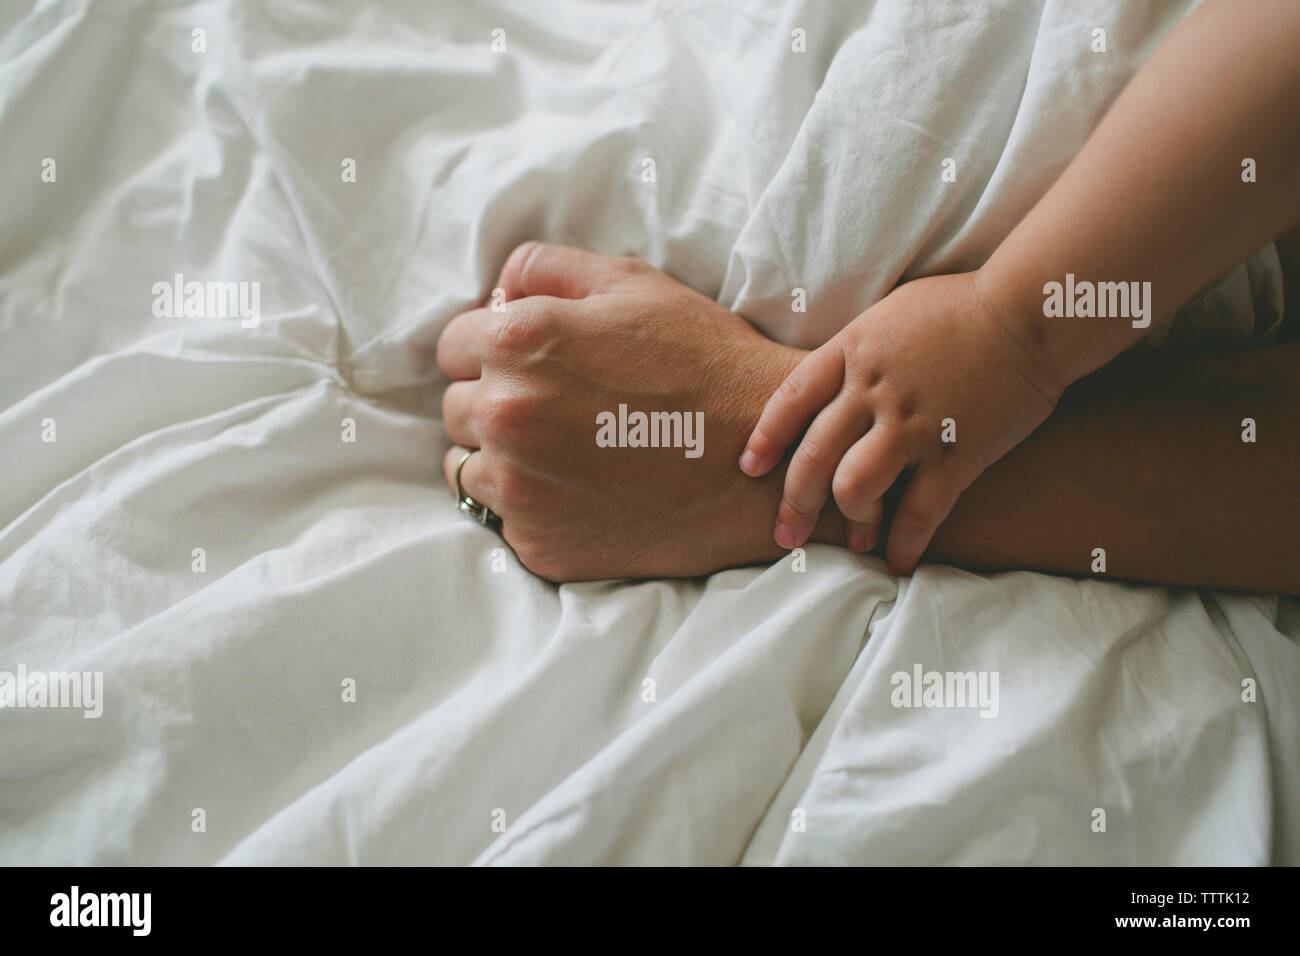 Portrait of boy holding mother's hand on bed Banque D'Images